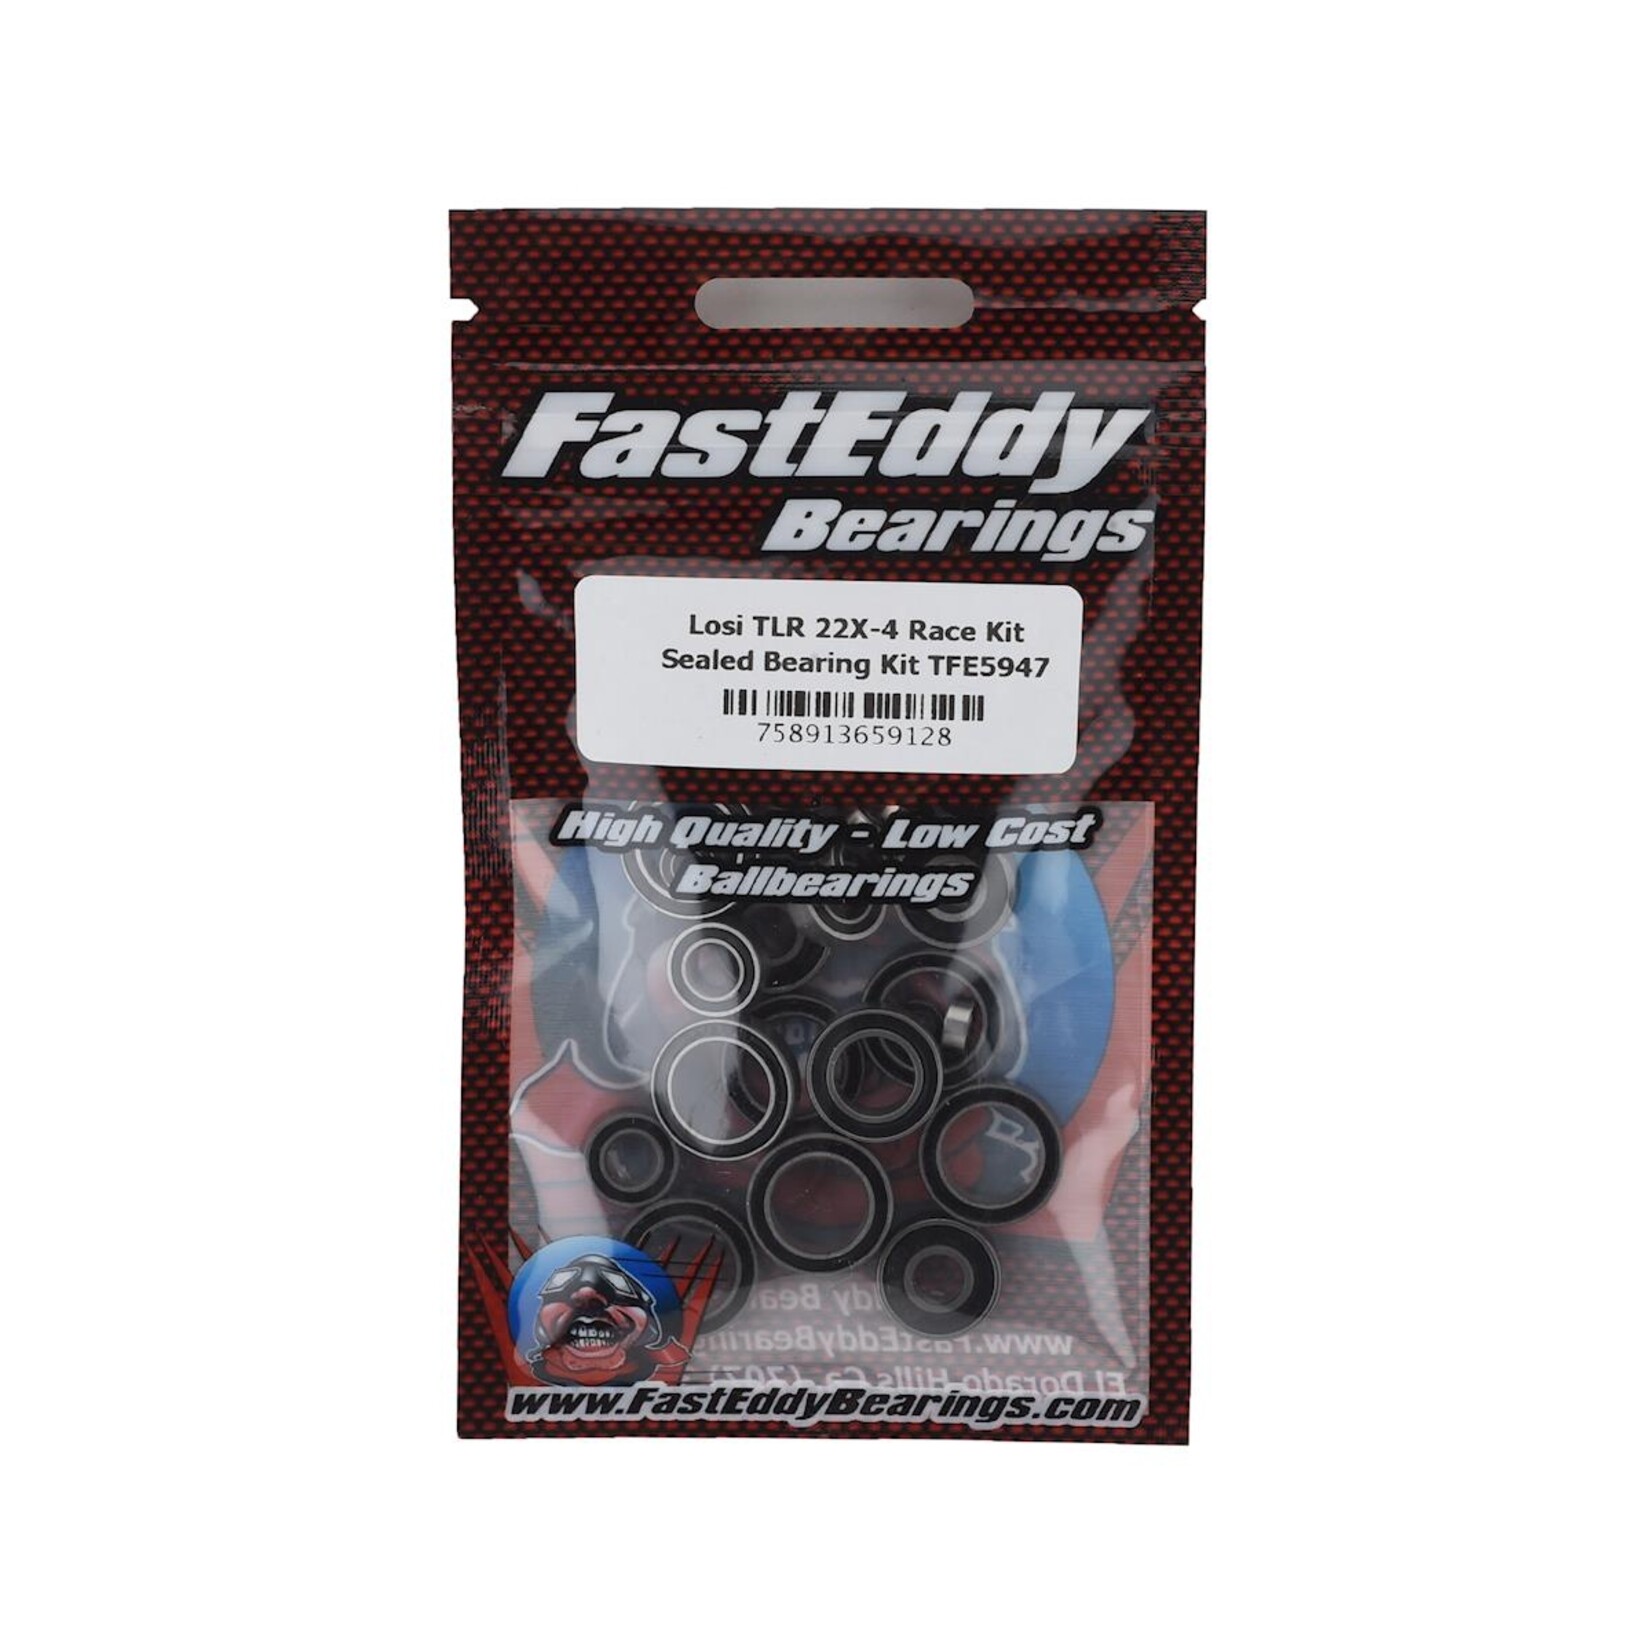 FastEddy FastEddy Losi TLR 22X-4 Race Kit Sealed Bearing Kit #TFE5947